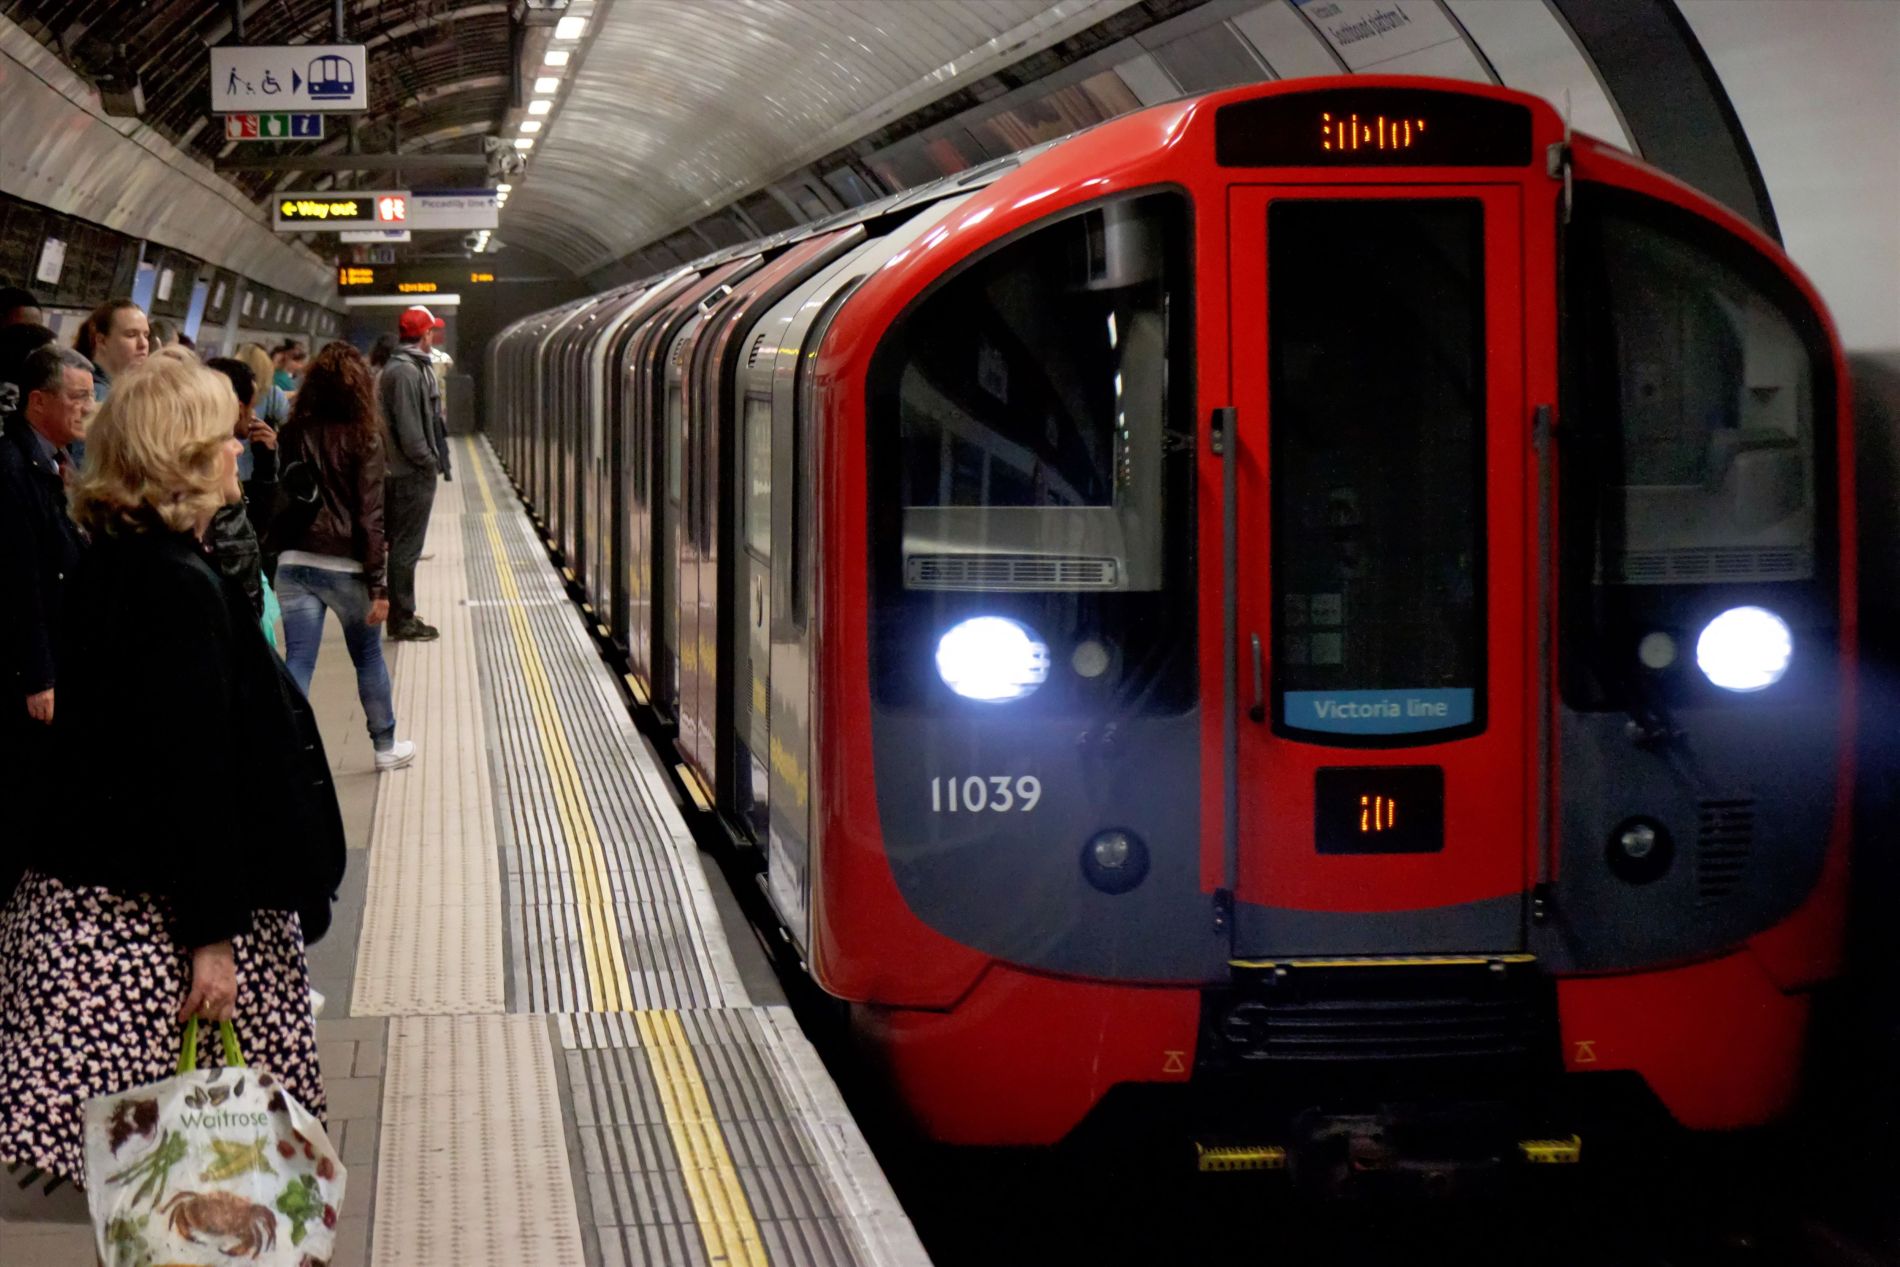 London Underground 2009 Stock by Tom Page via Wikimedia Commons